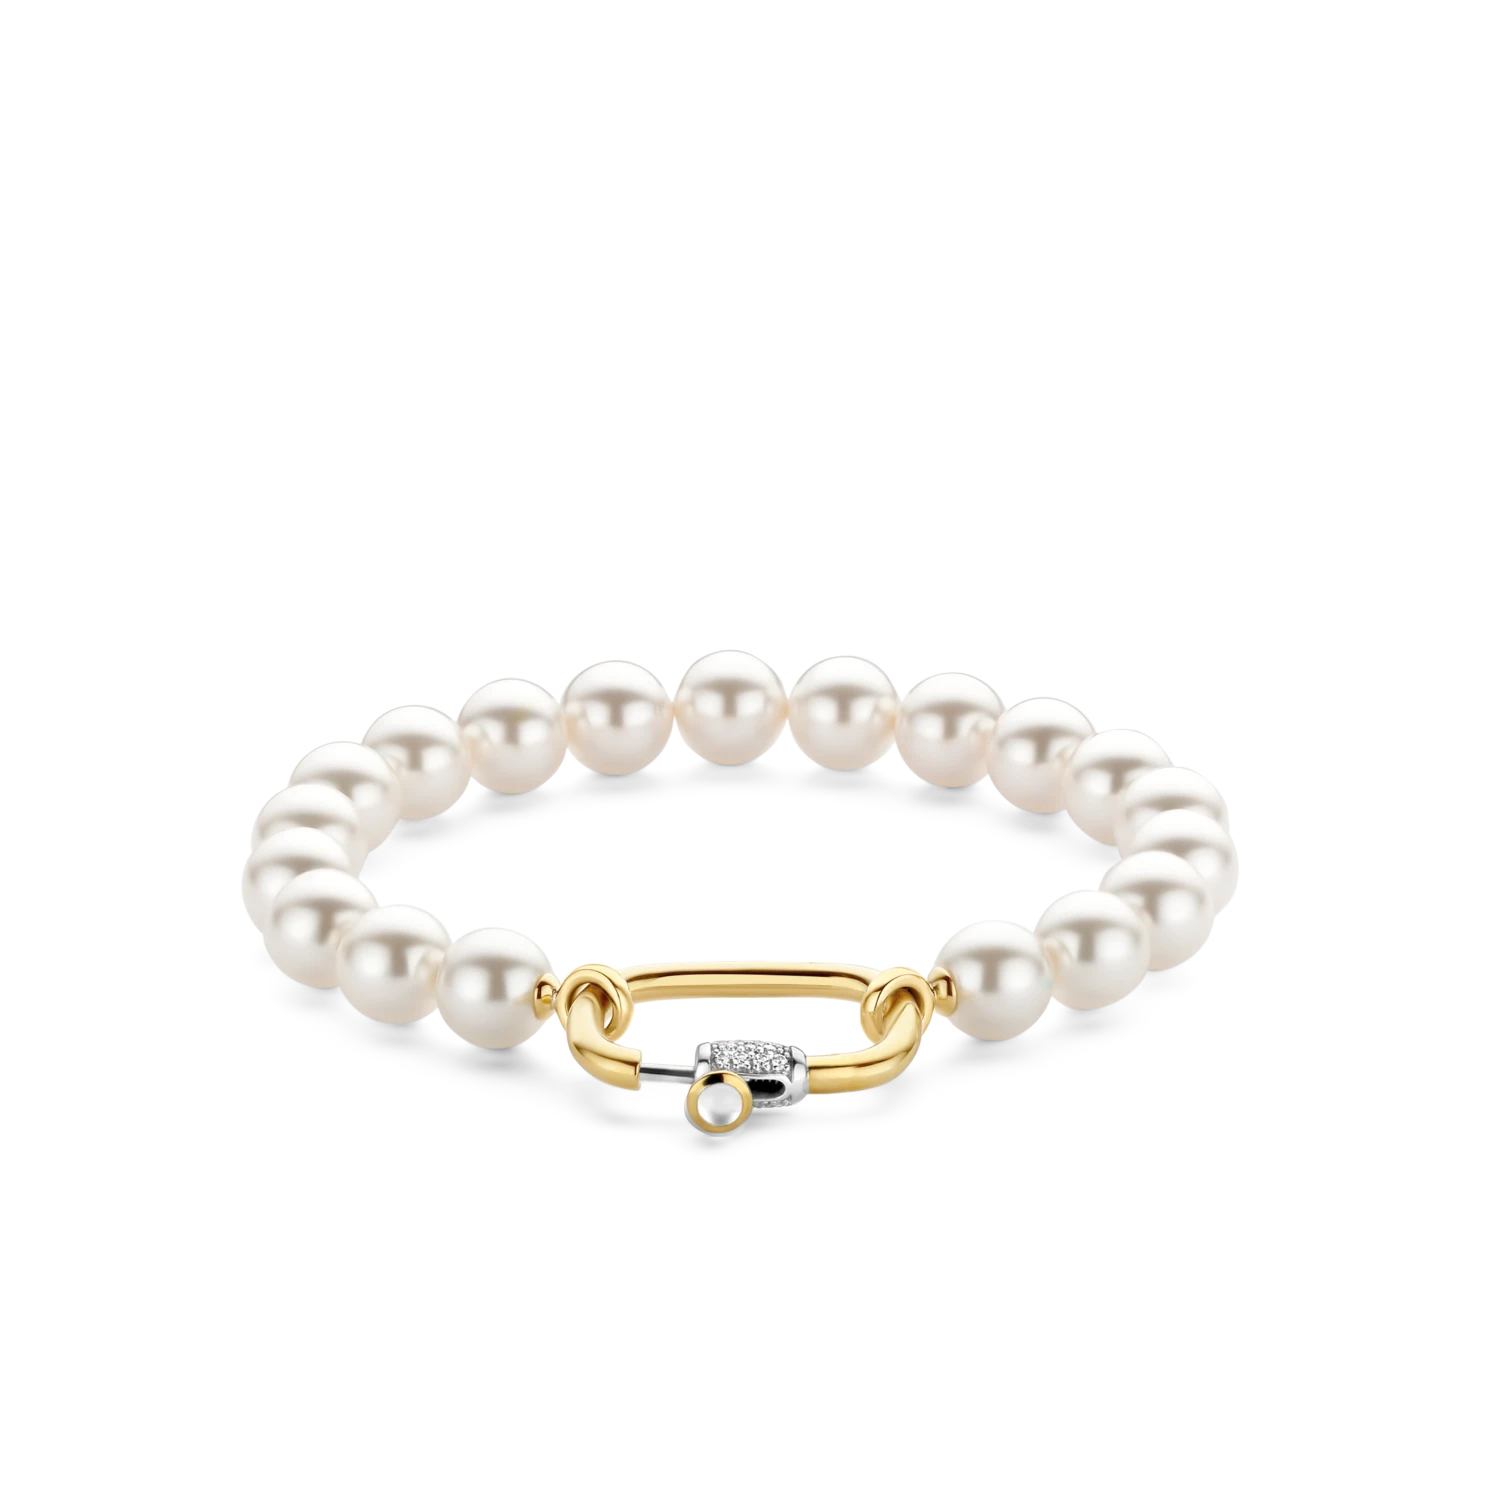 Ti Sento Pearl Bracelet with Large Gold Clasp